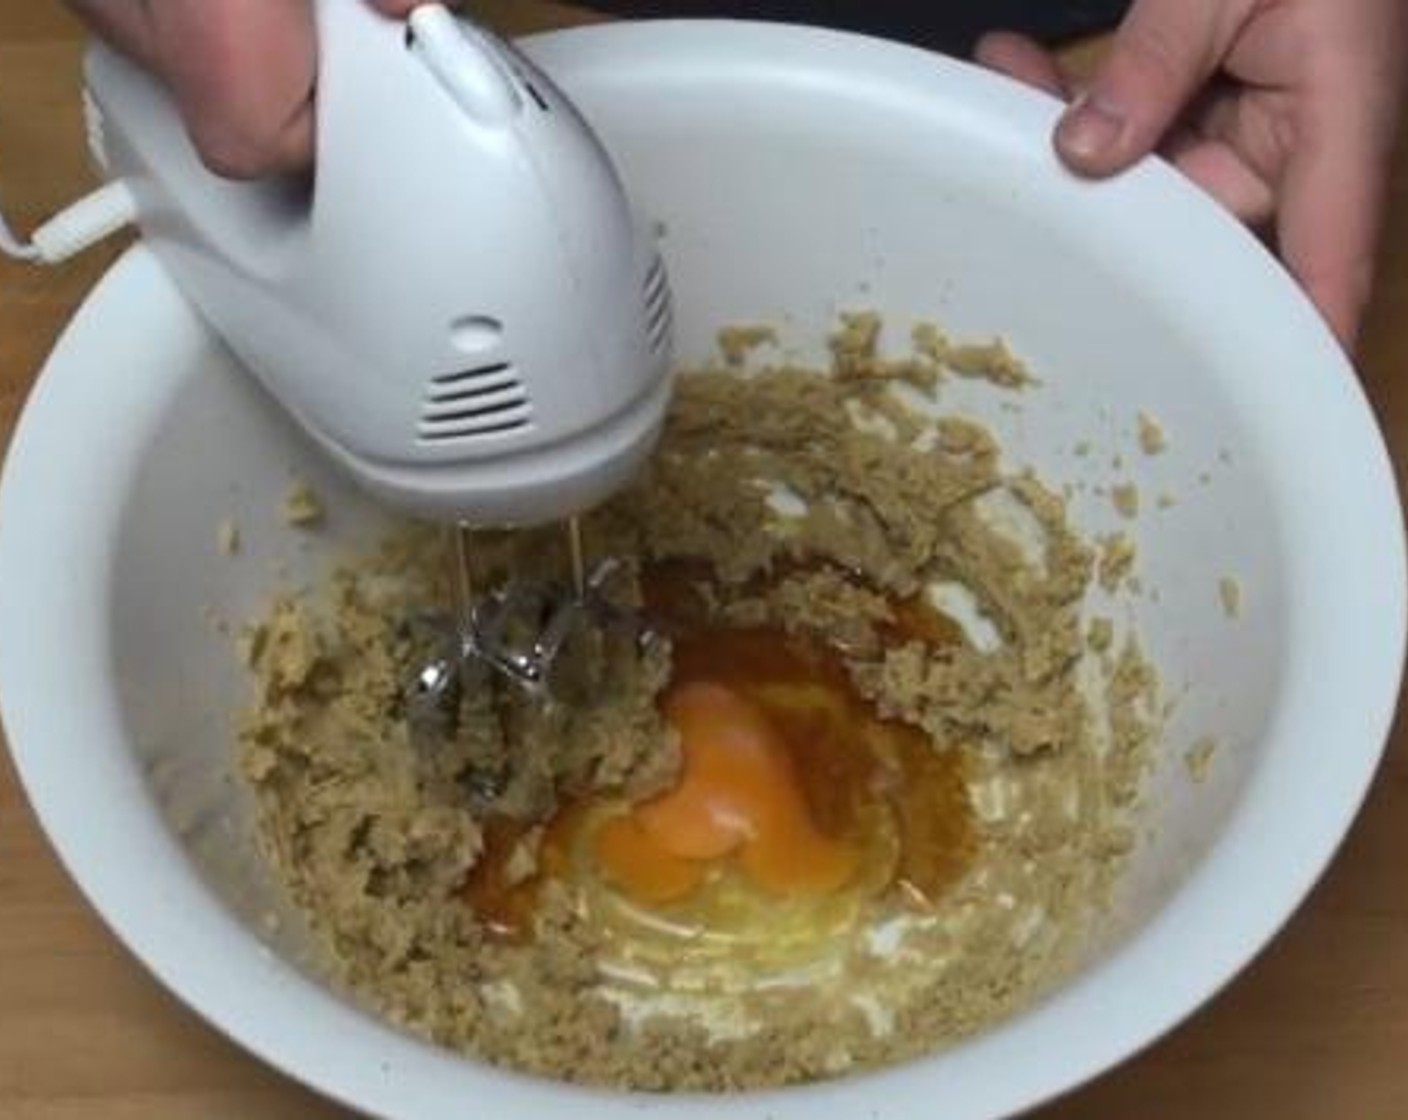 step 1 Using an electric mixer, mix together the Butter (1/2 cup) and Brown Sugar (2/3 cup). Then add in the Egg (1), and Maple Syrup (1/4 cup). Mix everything together.